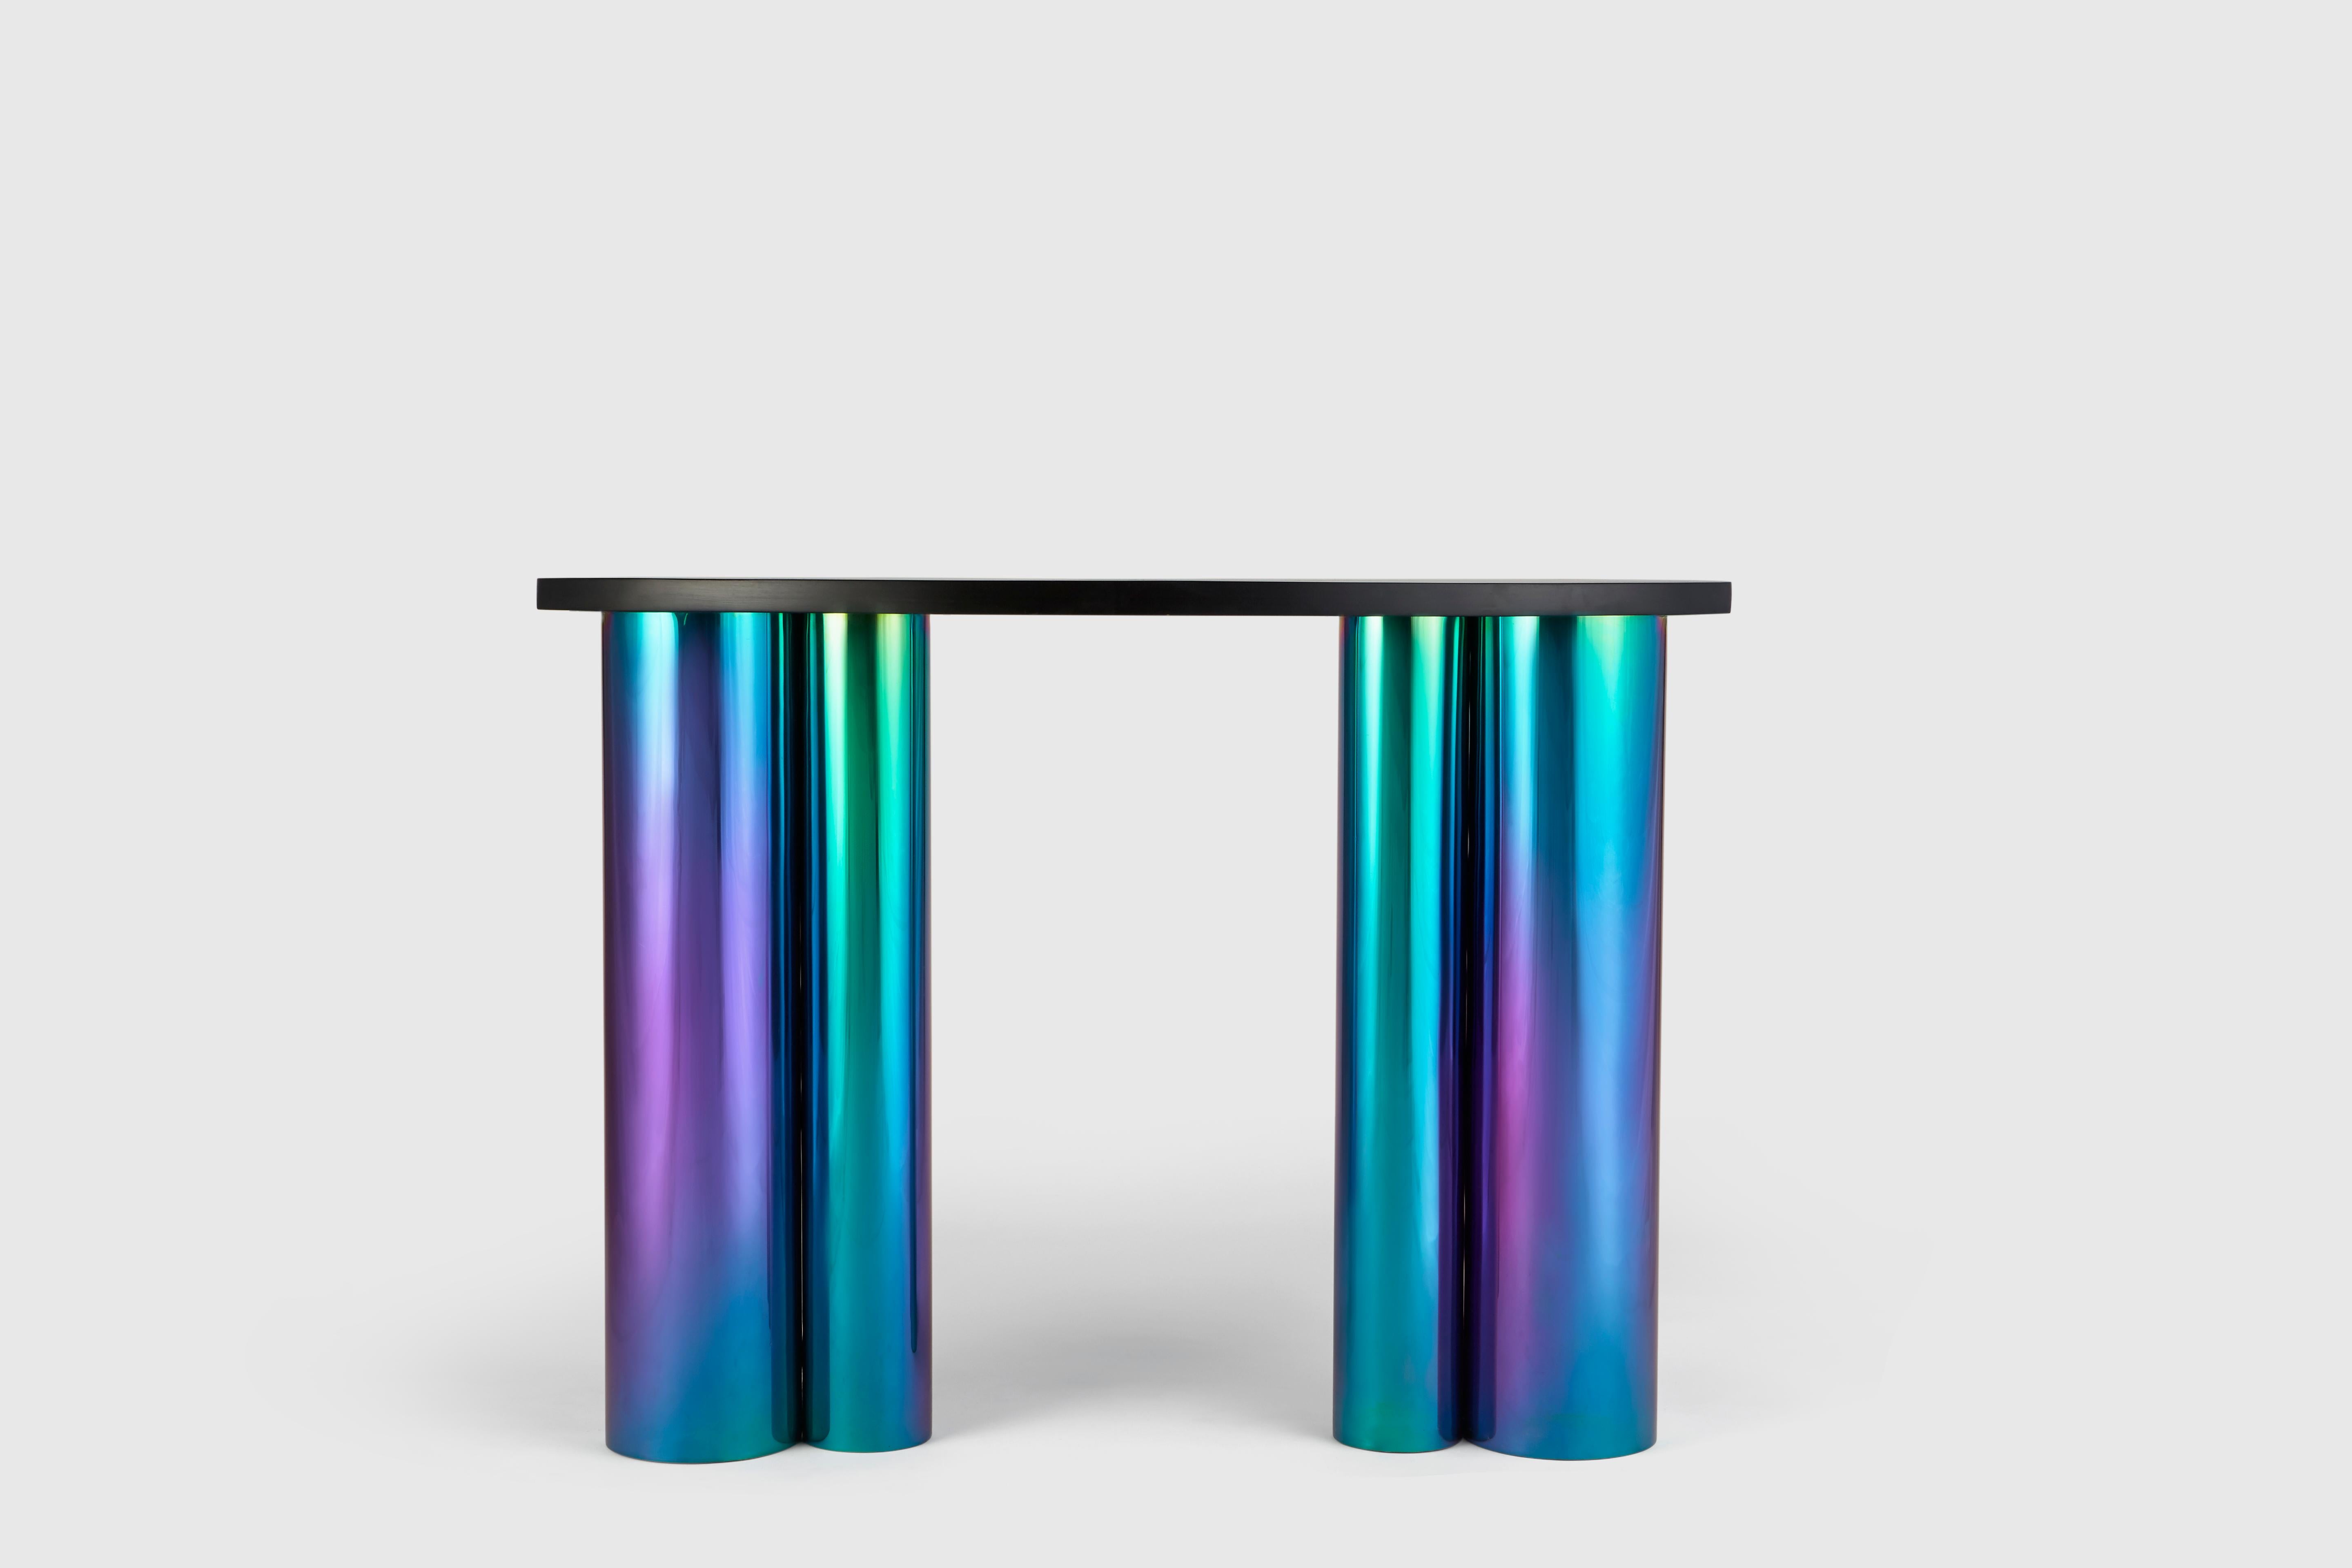 Unique bloom table by Hatsu
Dimensions: D 40 x W 40 x H 80 cm 
Materials: Stained solid wood on eloctroplated steel body

Hatsu is a design studio based in Mumbai that creates modern lighting that are unique and immediately recognisable. We